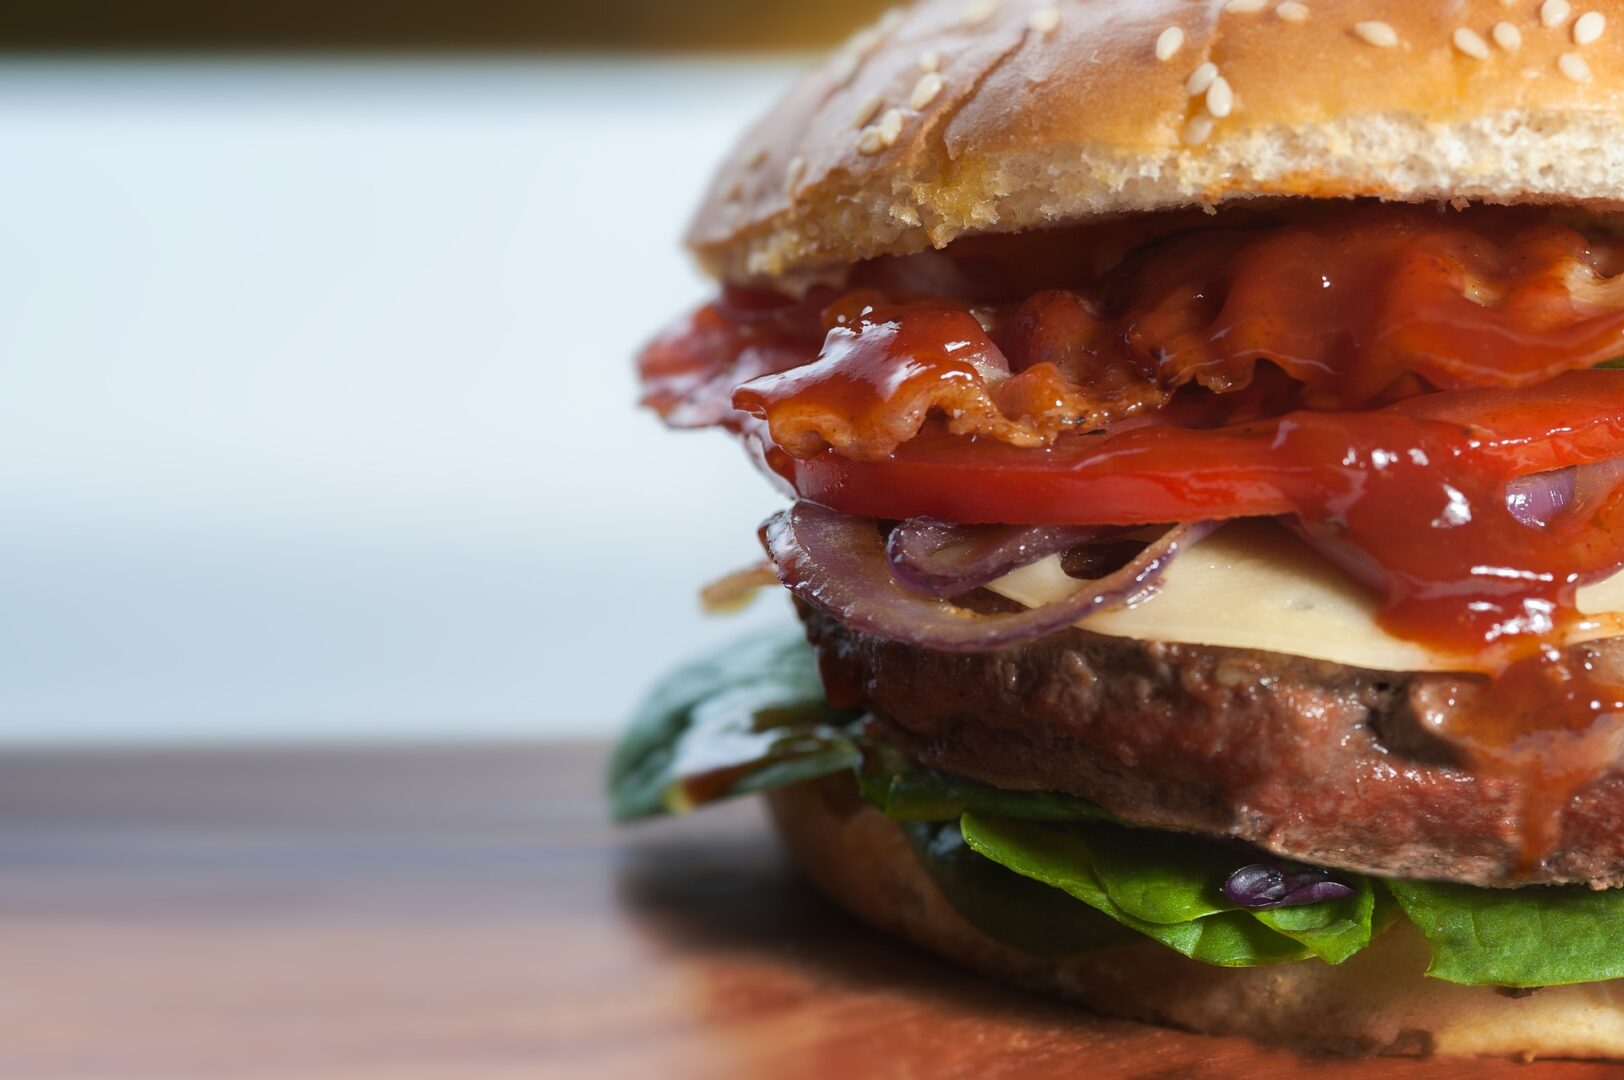 Close-up of a juicy hamburger with cheese, tomatoes, onions, lettuce, and a glossy sauce on a sesame bun.